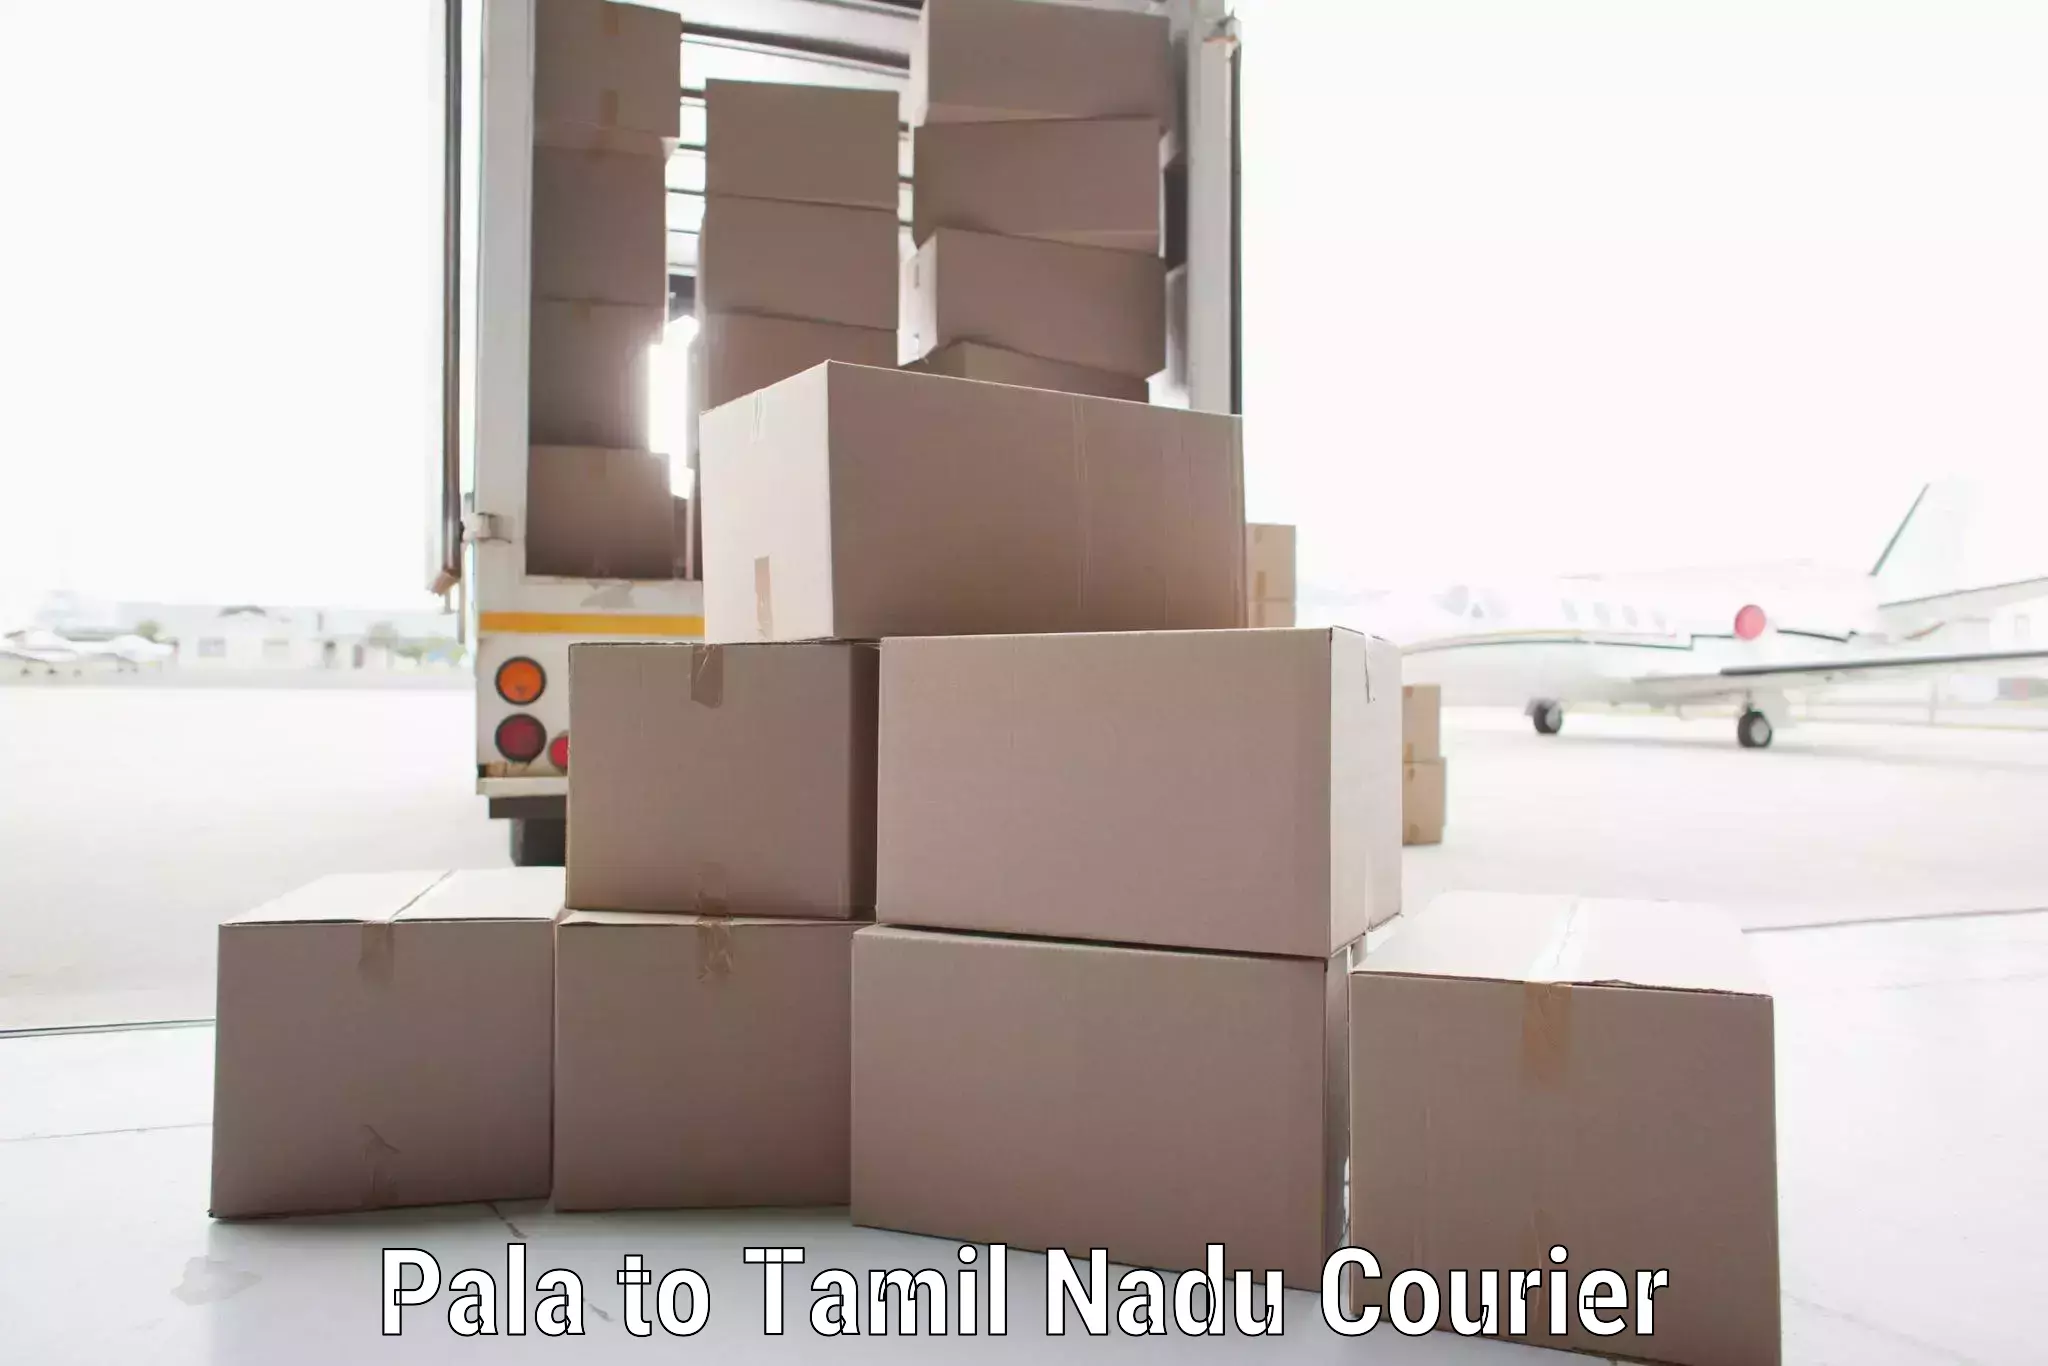 Courier rate comparison Pala to Mettur